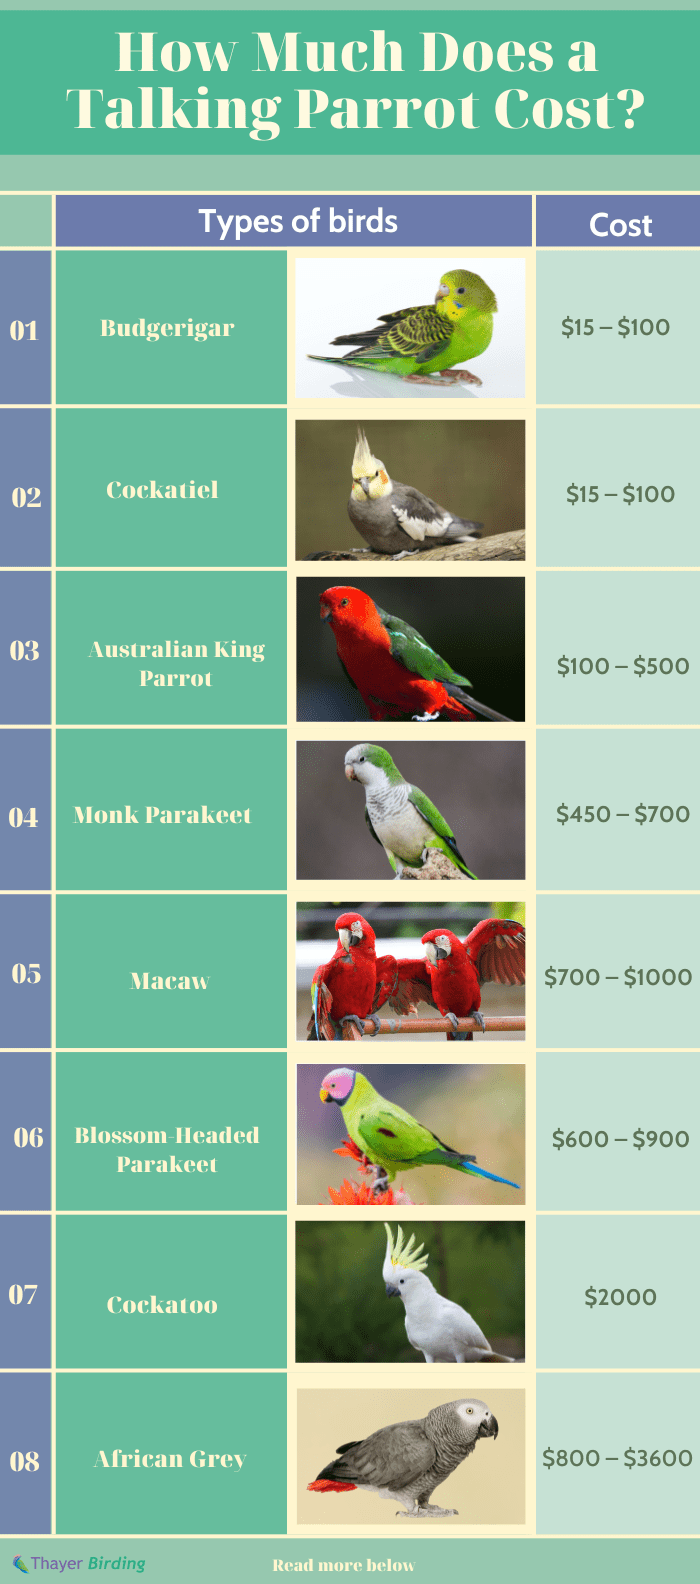 How Much Does a Talking Parrot Cost? (Updated in 2023)